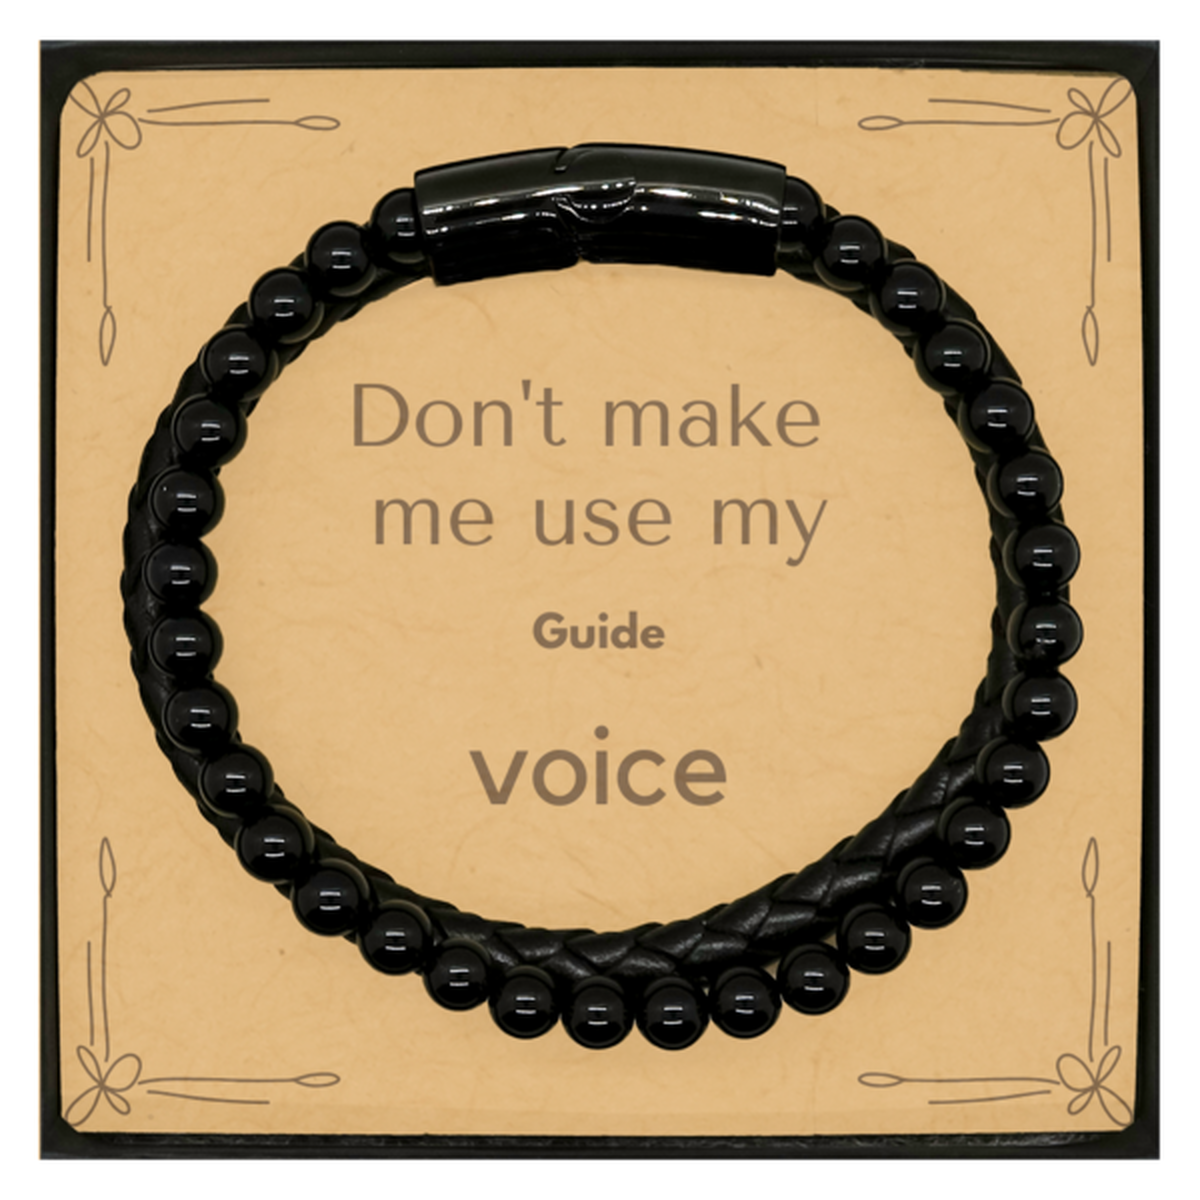 Don't make me use my Guide voice, Sarcasm Guide Card Gifts, Christmas Guide Stone Leather Bracelets Birthday Unique Gifts For Guide Coworkers, Men, Women, Colleague, Friends